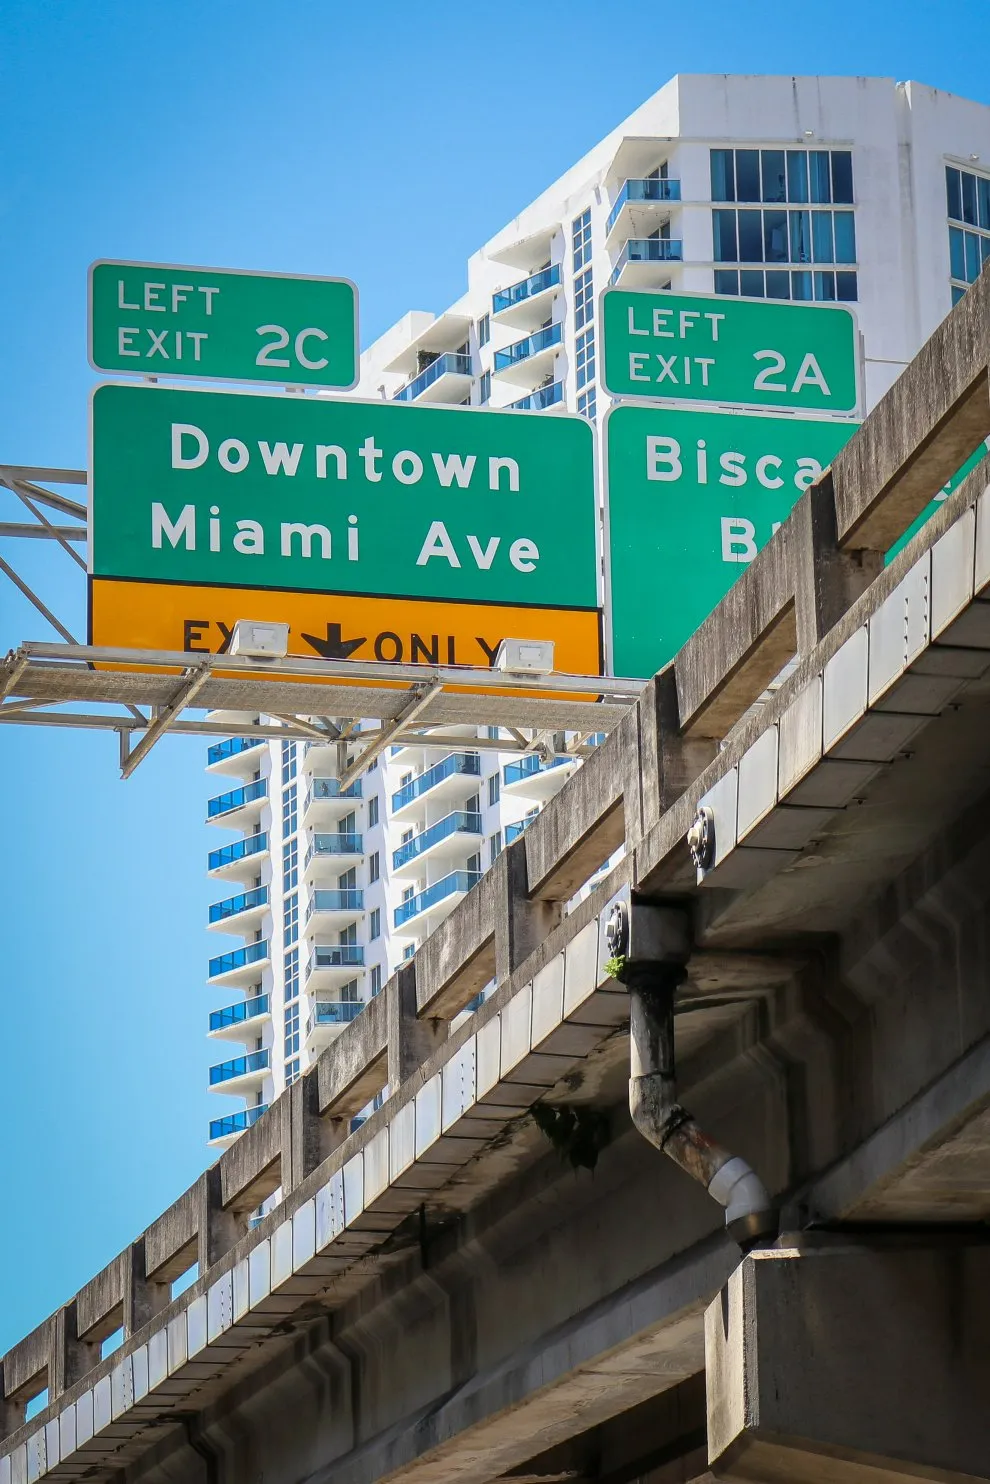 5 Key Factors About Quality of Life in Miami